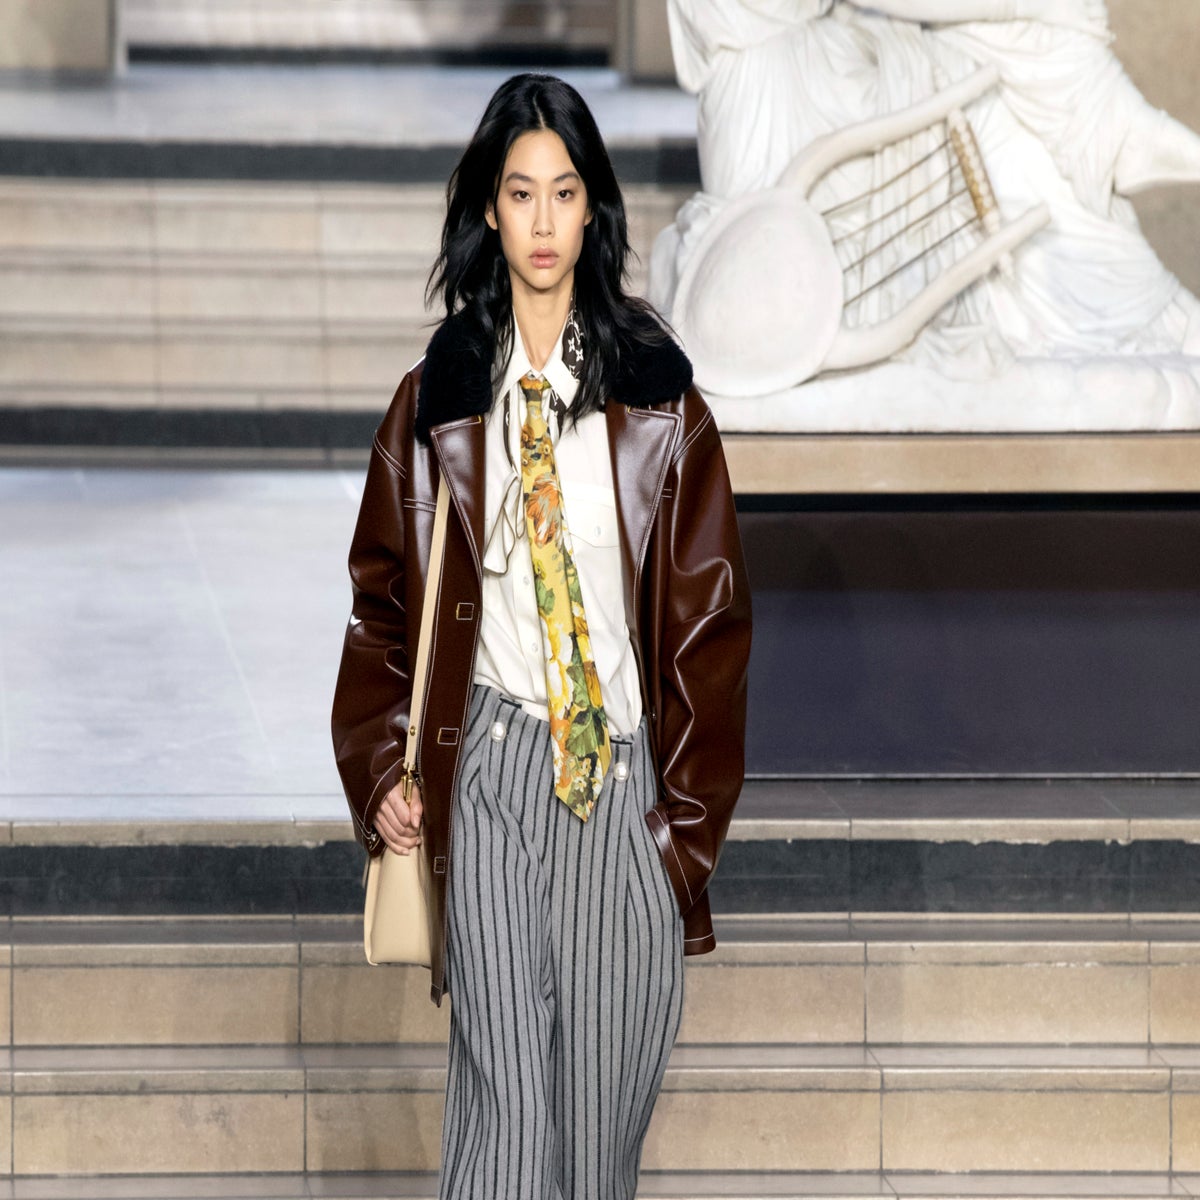 HoYeon Jung of 'Squid Game' Is Louis Vuitton's Newest Global House  Ambassador